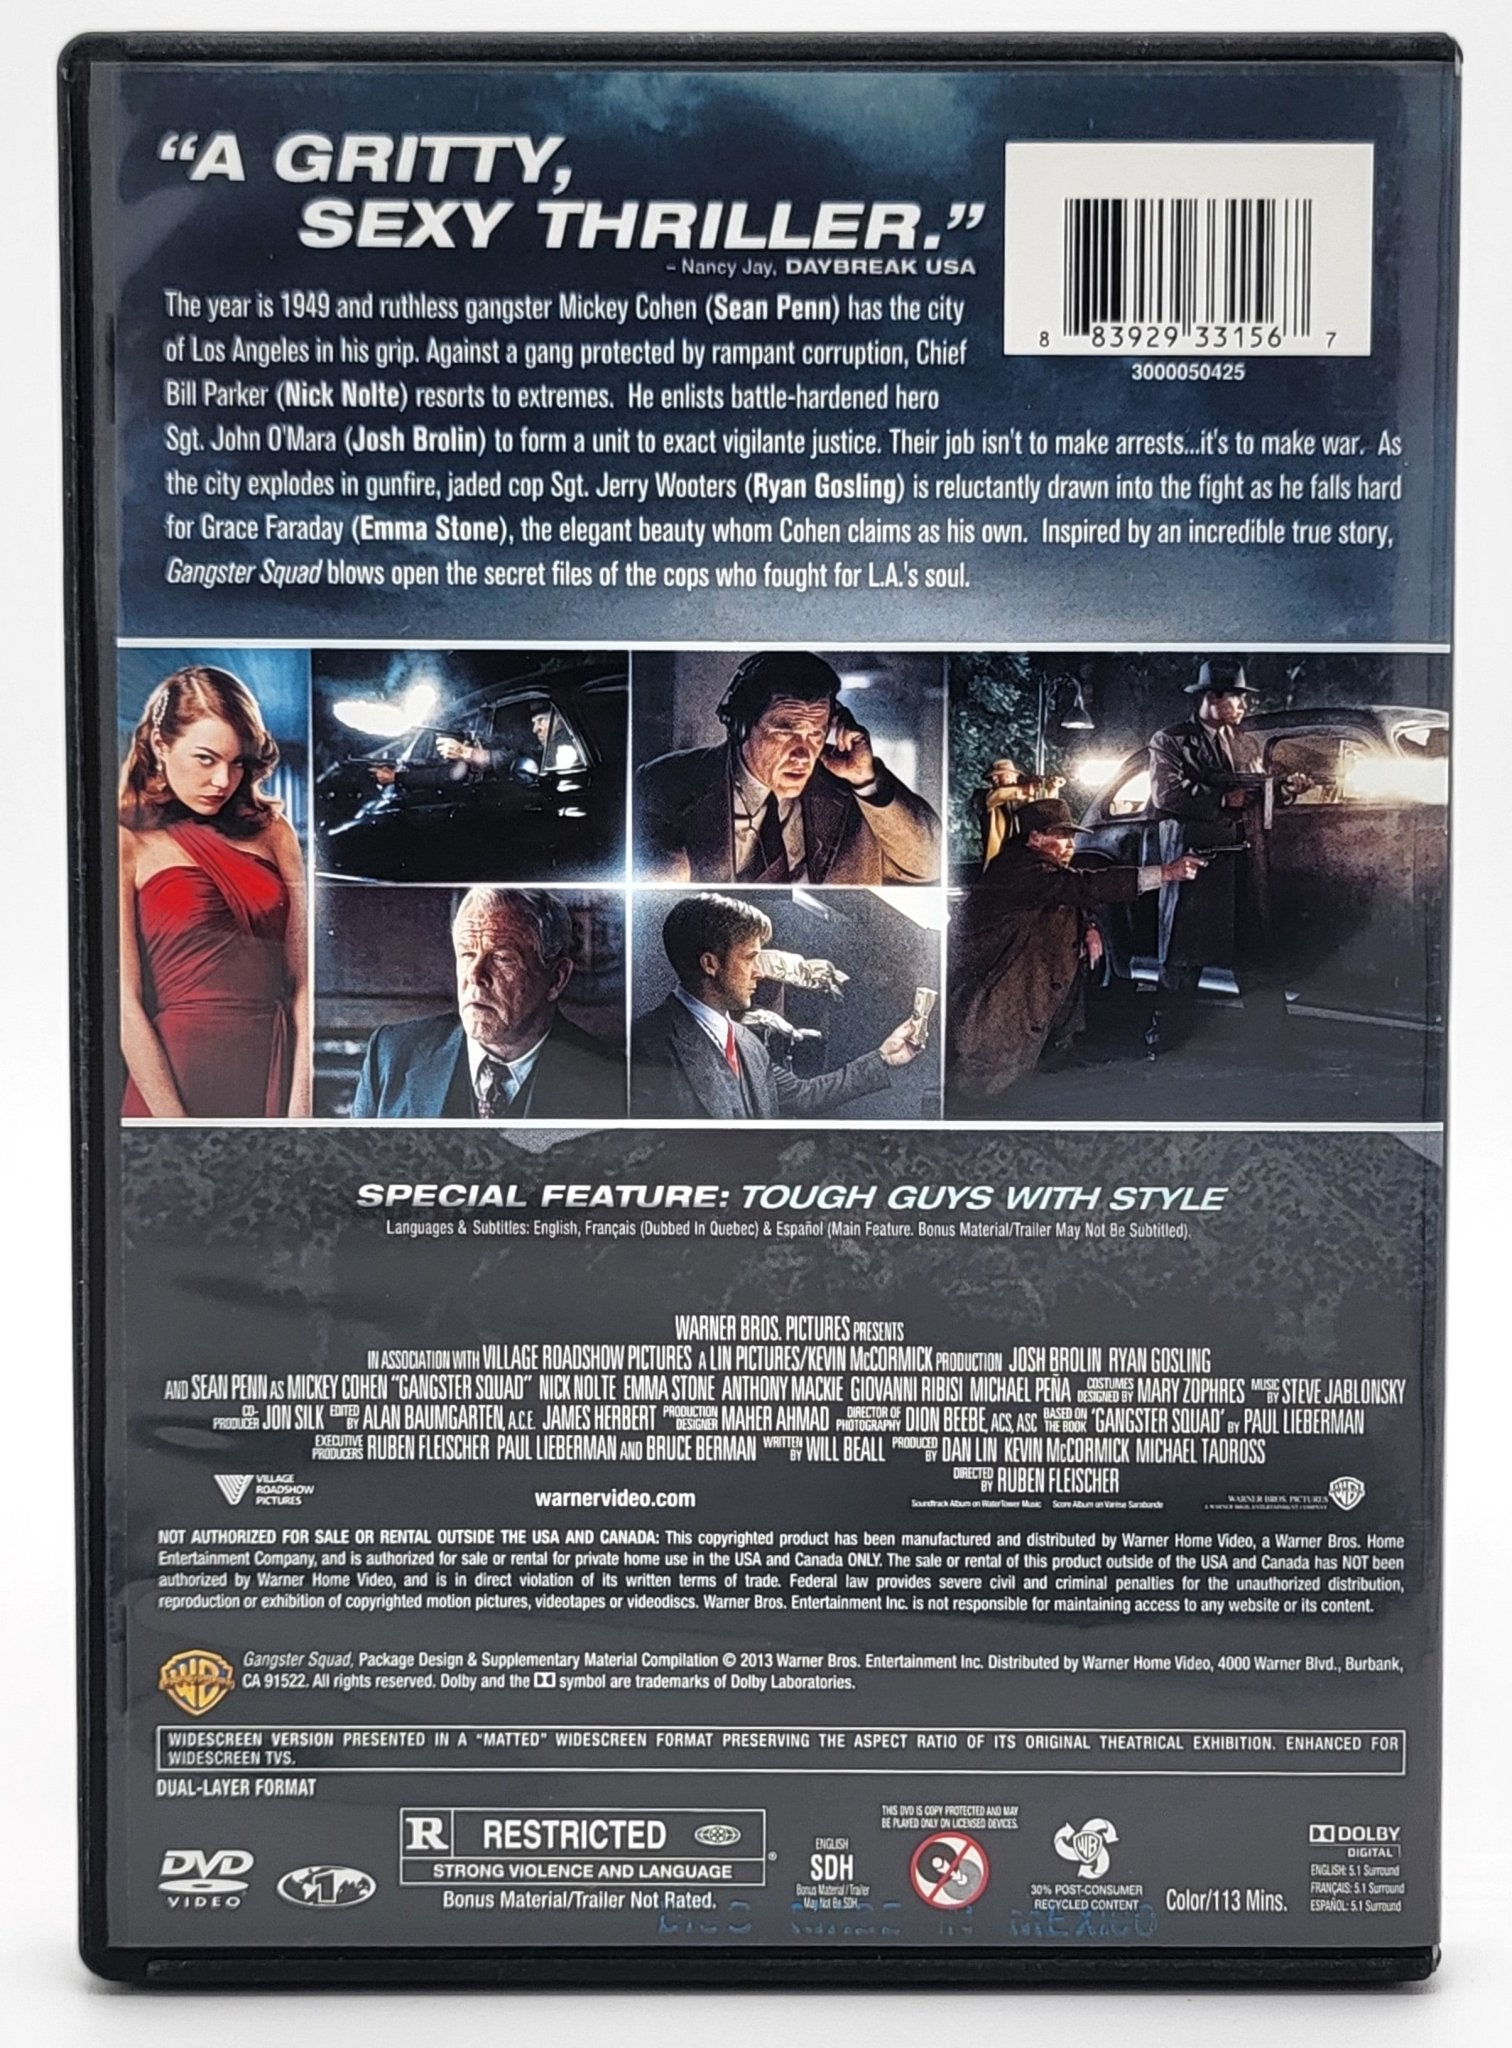 Warner Home Video - Gangster Squad | DVD | Widescreen - DVD - Steady Bunny Shop